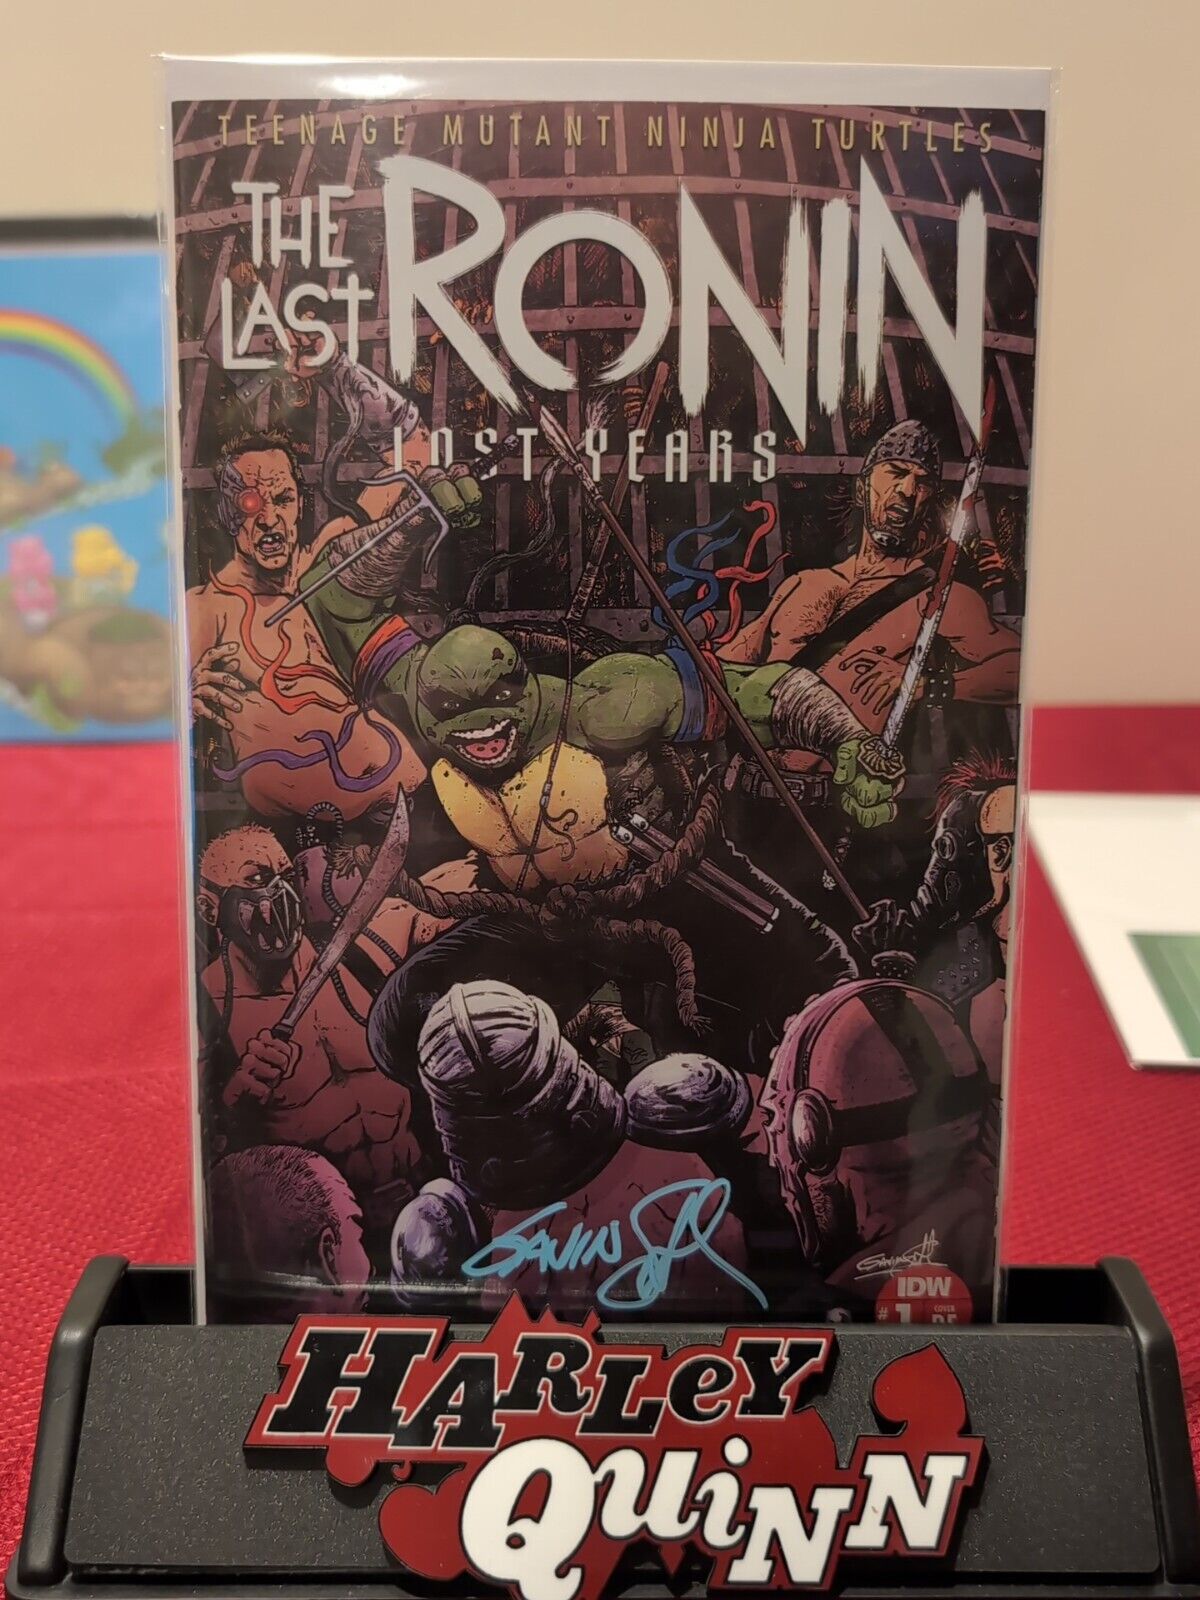 TMNT THE LAST RONIN: LOST YEARS #1 GAVIN SMITH Retailer Exclusive Variant Cover